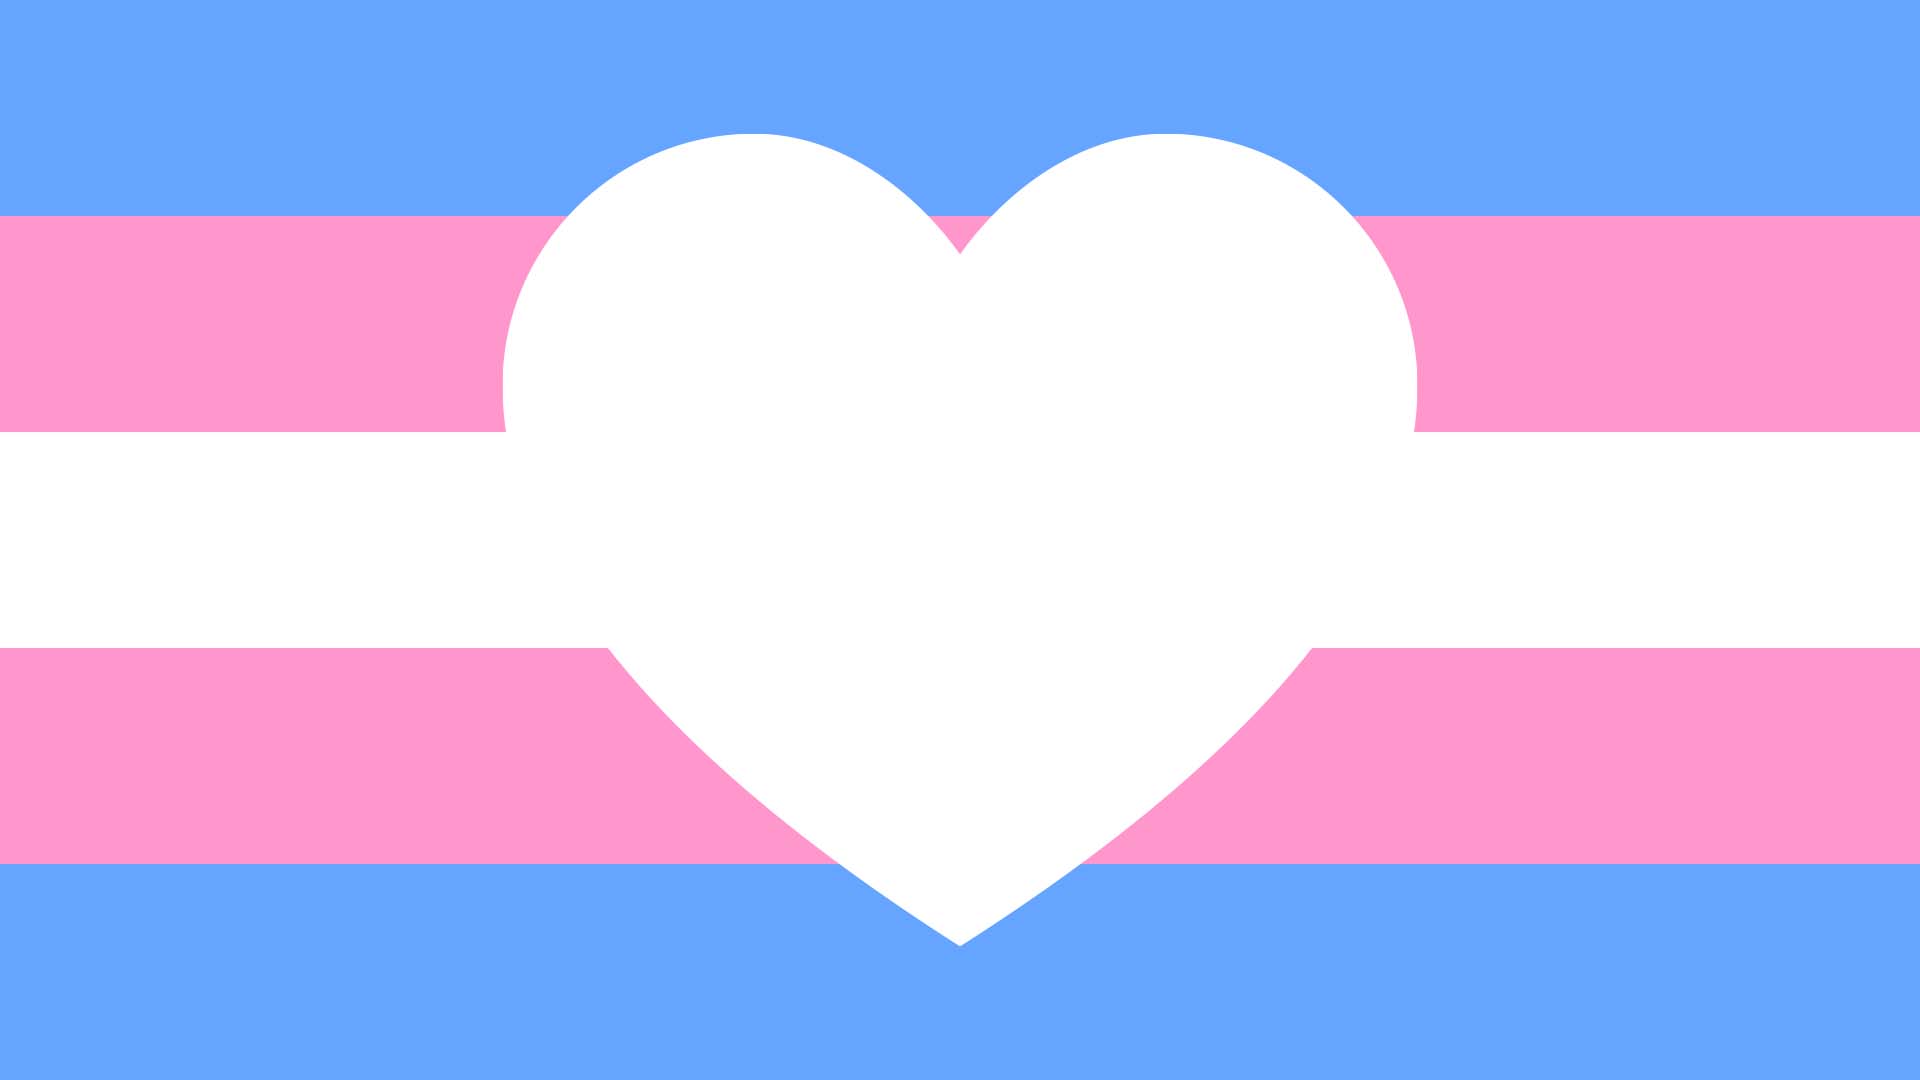 Transgender flag with two light blue horizontal likes, two light pink ones and one white. White love heart in the center.